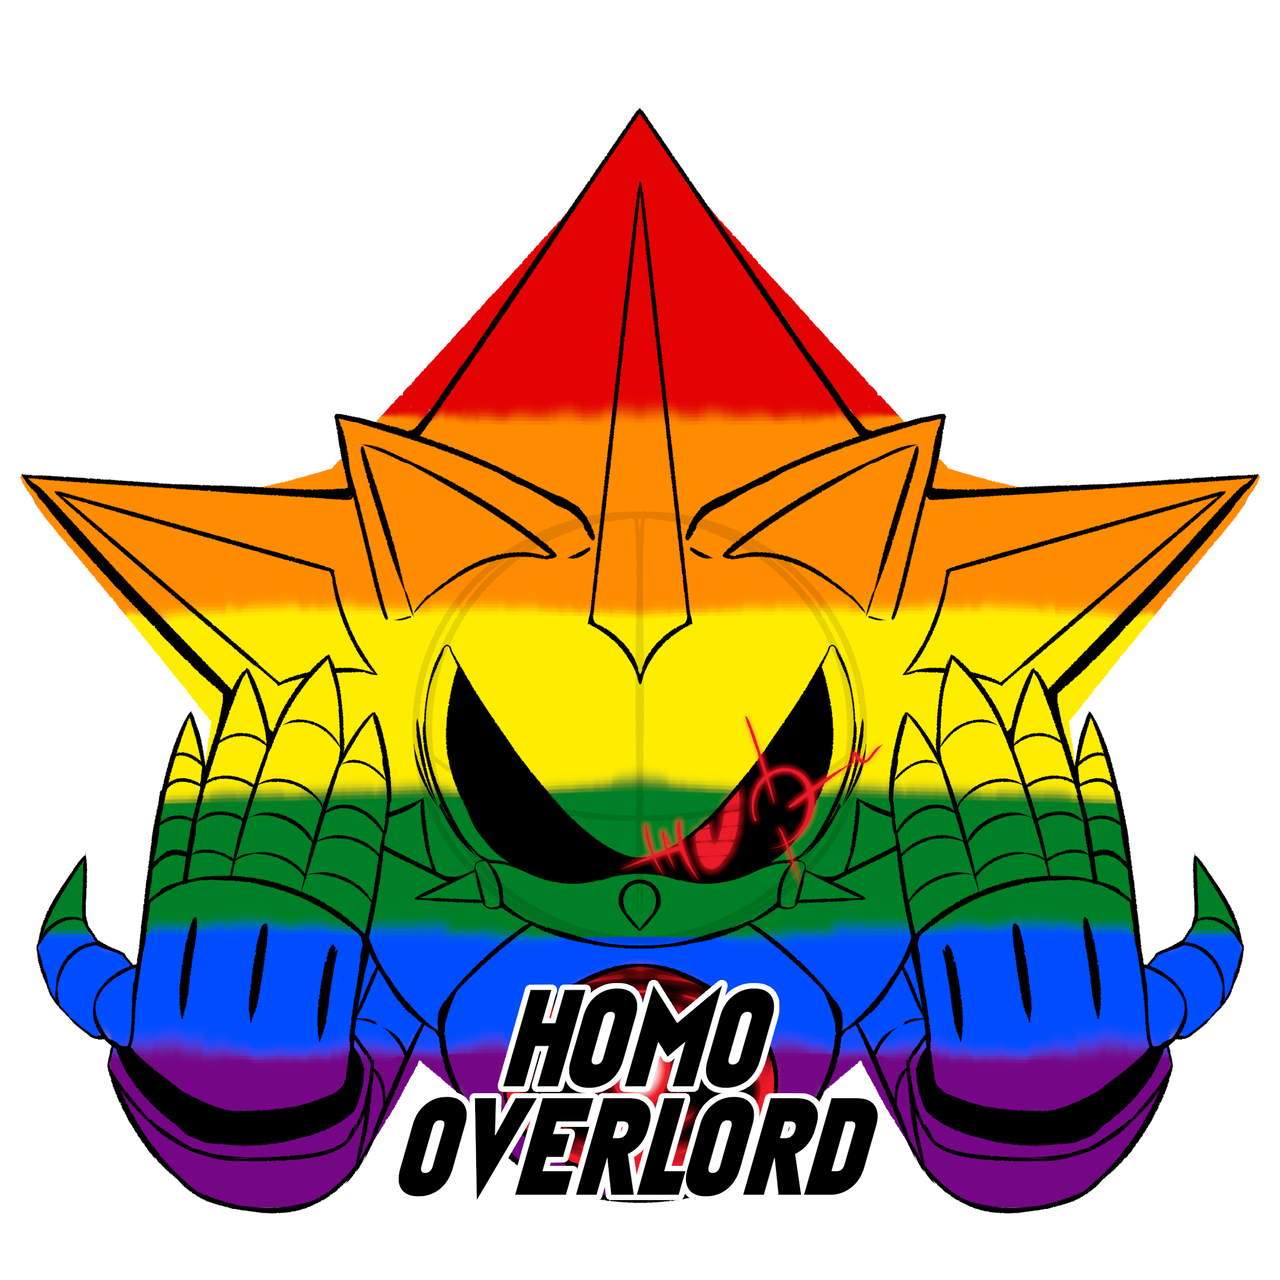 NEO HOMO OVERLORD by Bonetail999 on DeviantArt